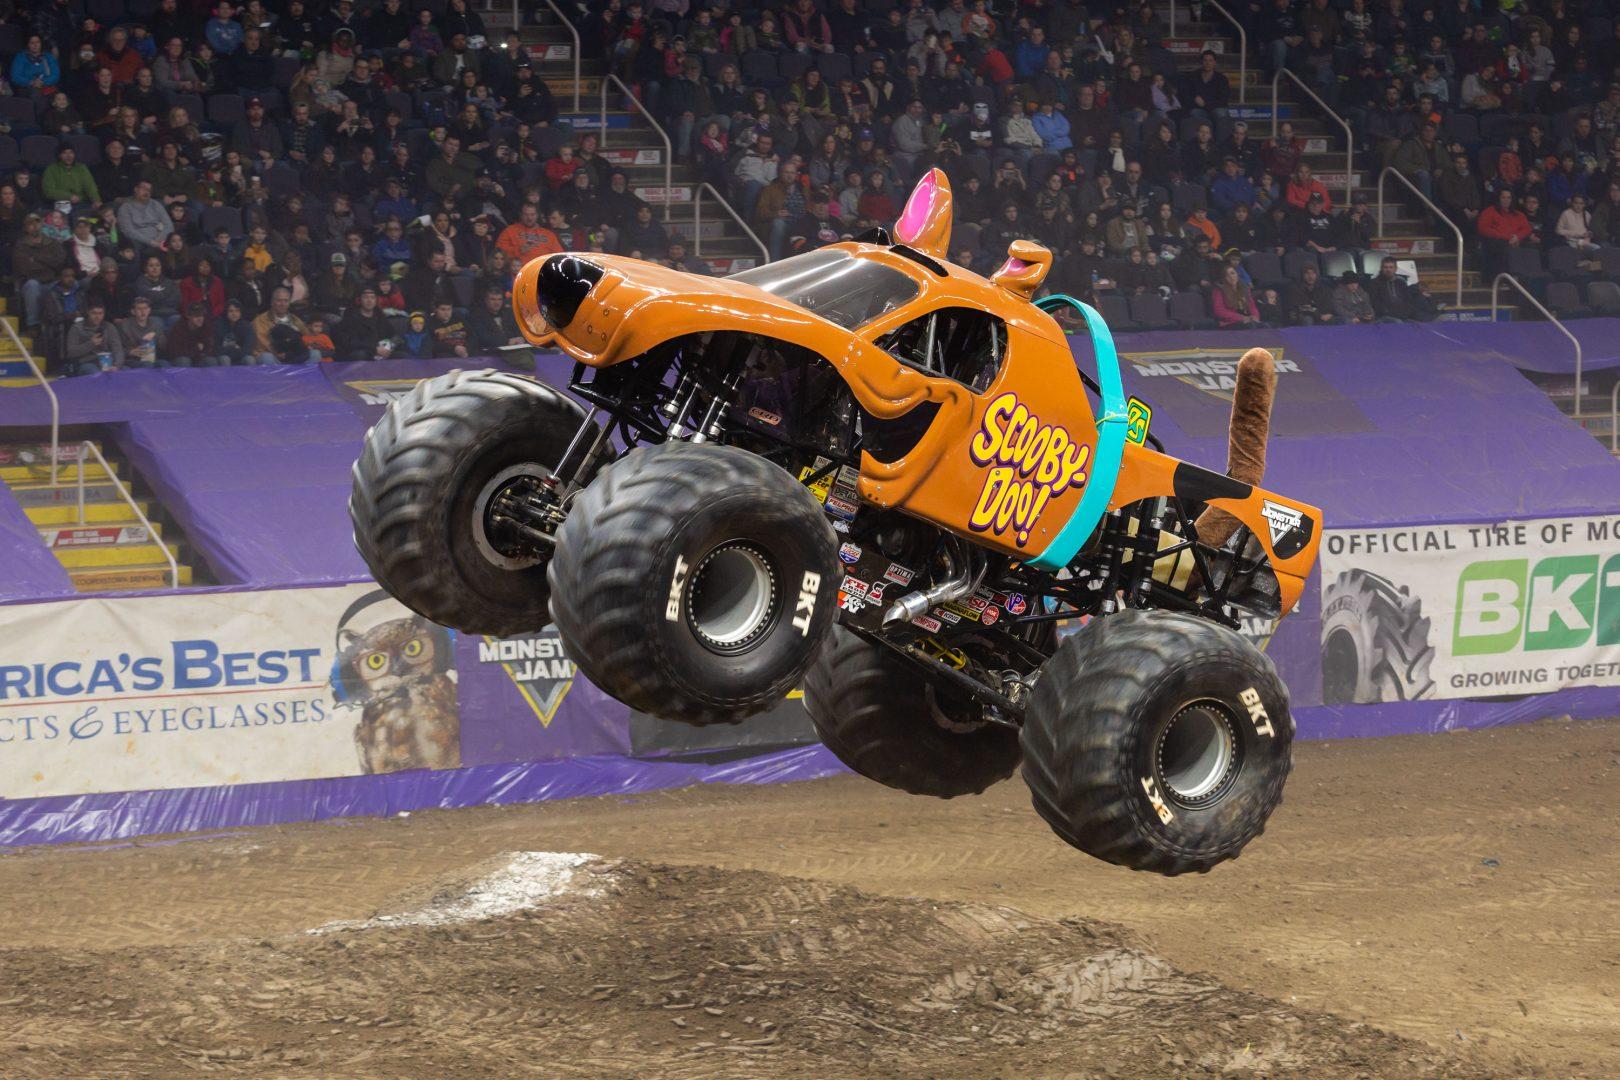 The truck Cozad drives, Scooby-Doo, is named and modeled after the iconic cartoon character. (Courtesy of Monster Jam)